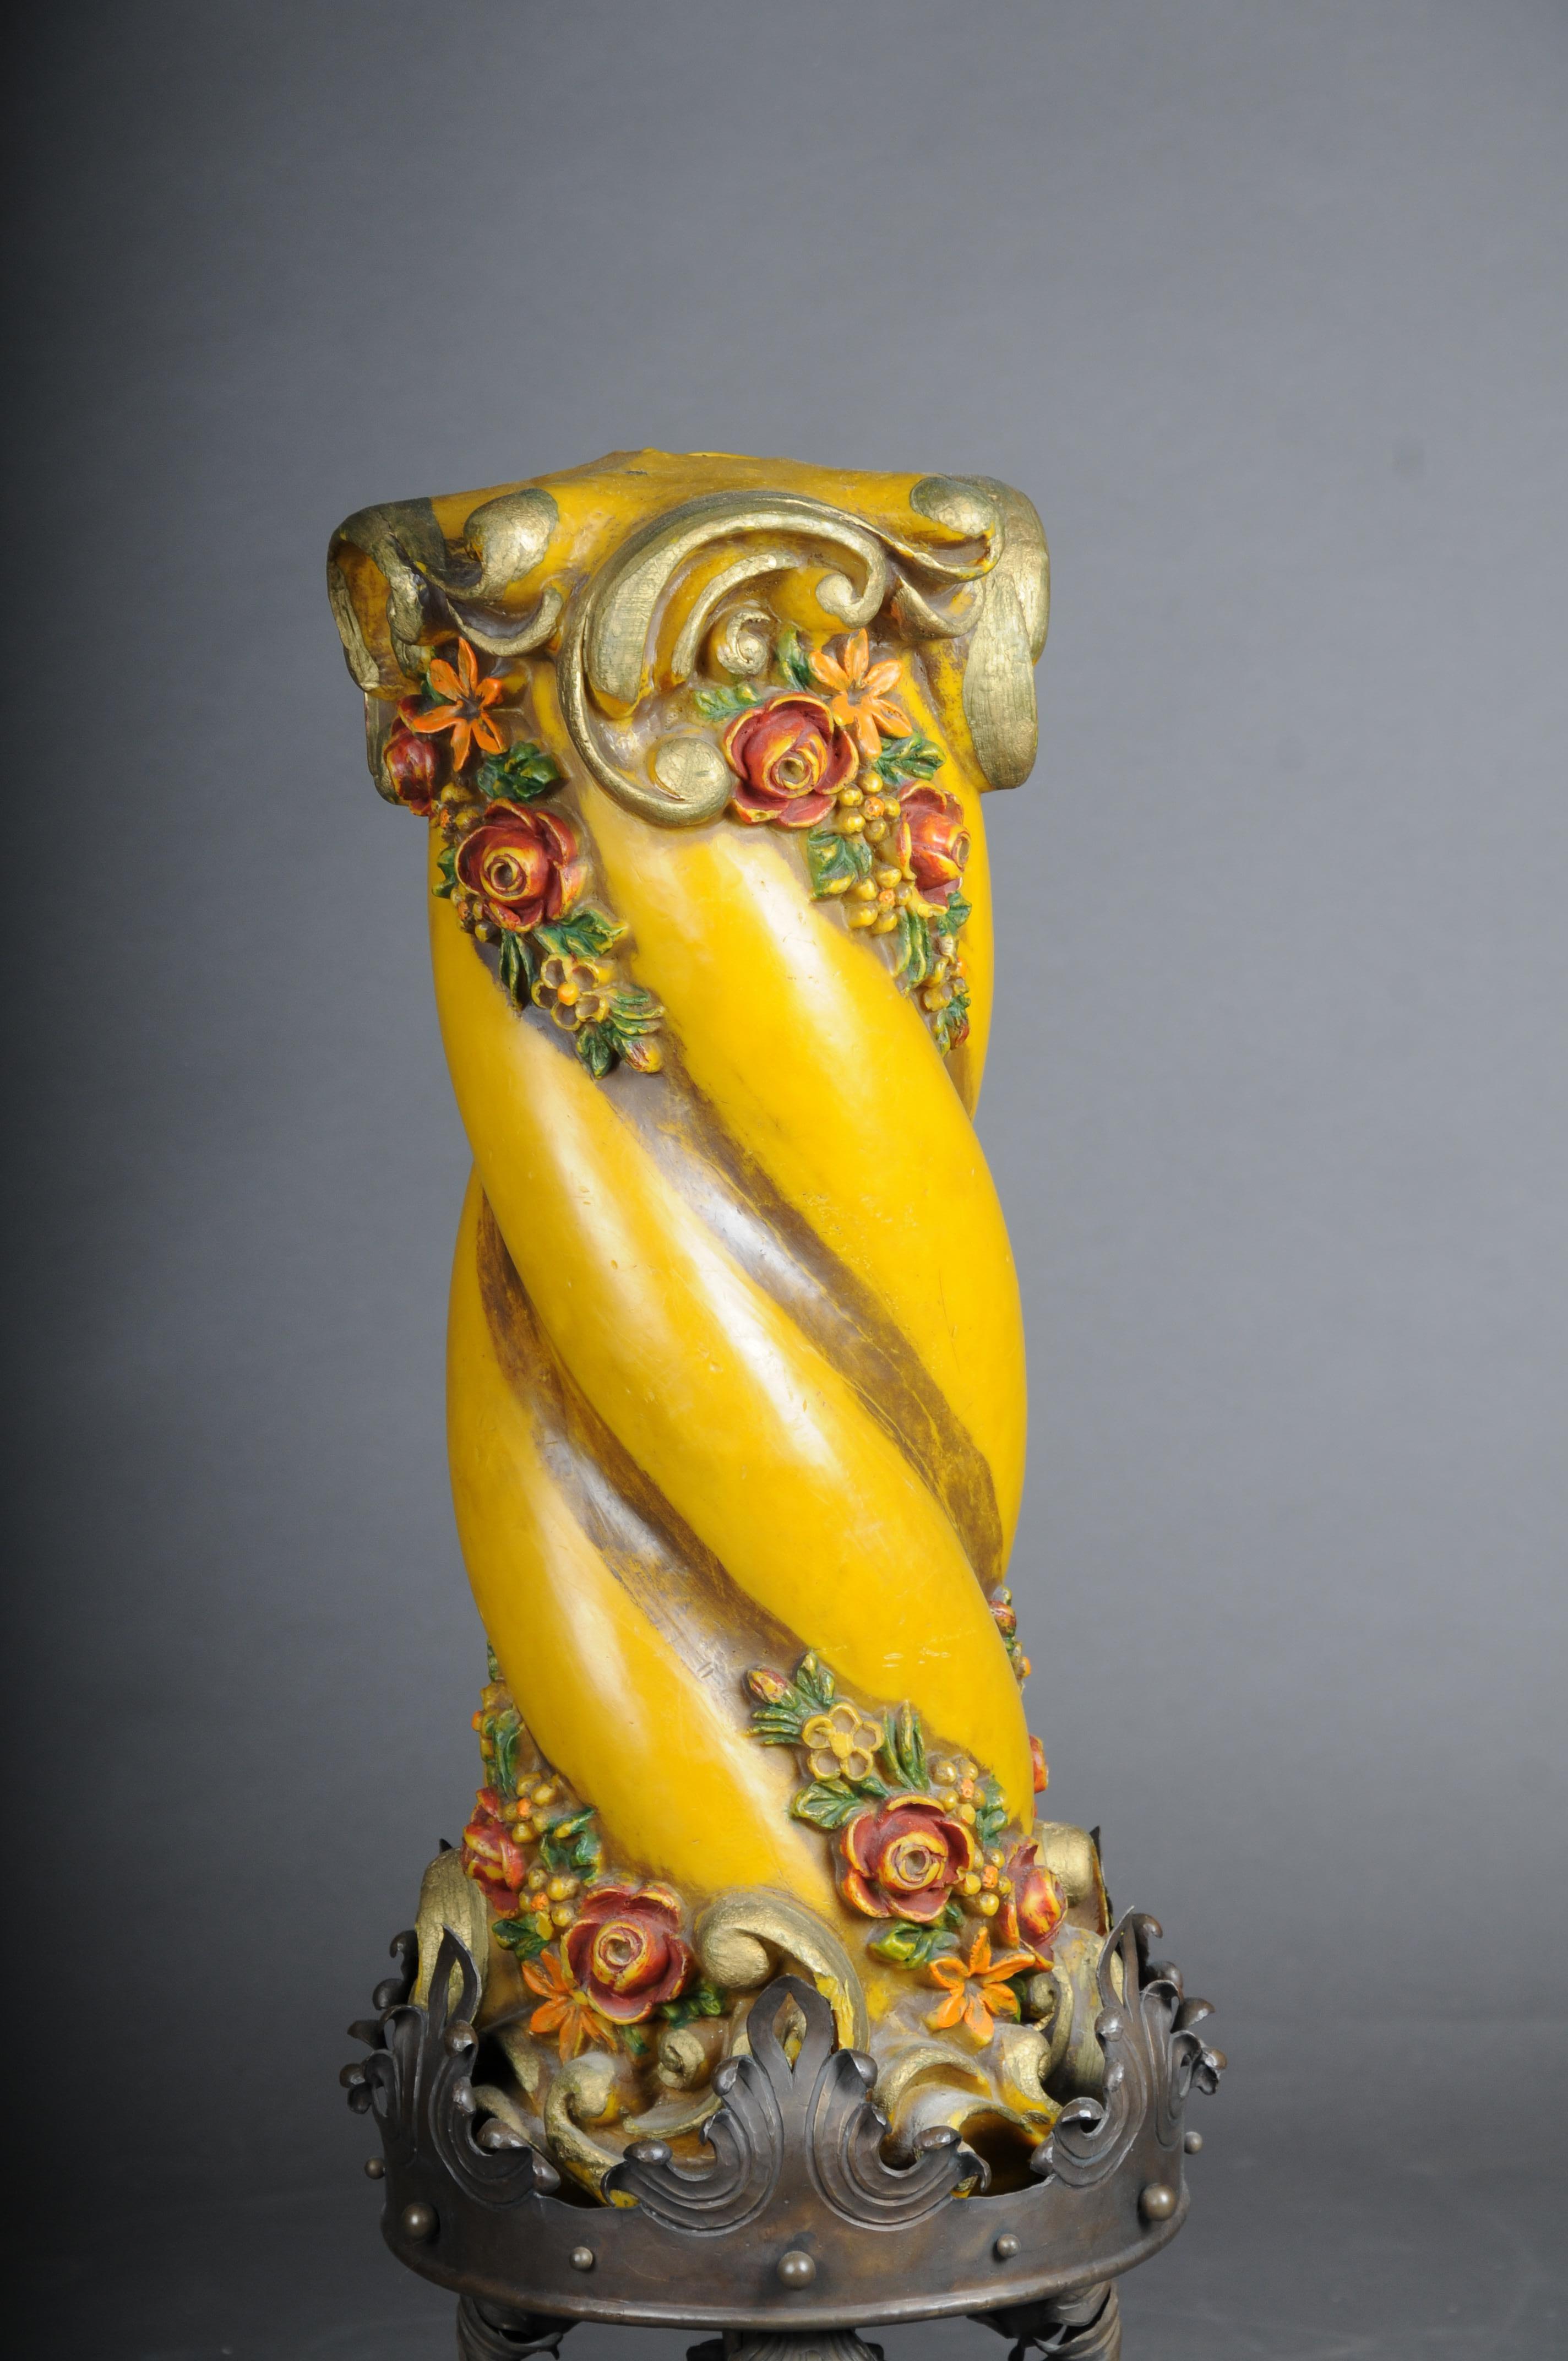 Huge Torchères/candlesticks iron, unique

Highly ornamented spiral-shaped candle made of solid wax, decorated in yellow and colored. Decorated iron frame.

Base in ornate and lavishly decorated iron. Very unusual and rare. Germany early 20th